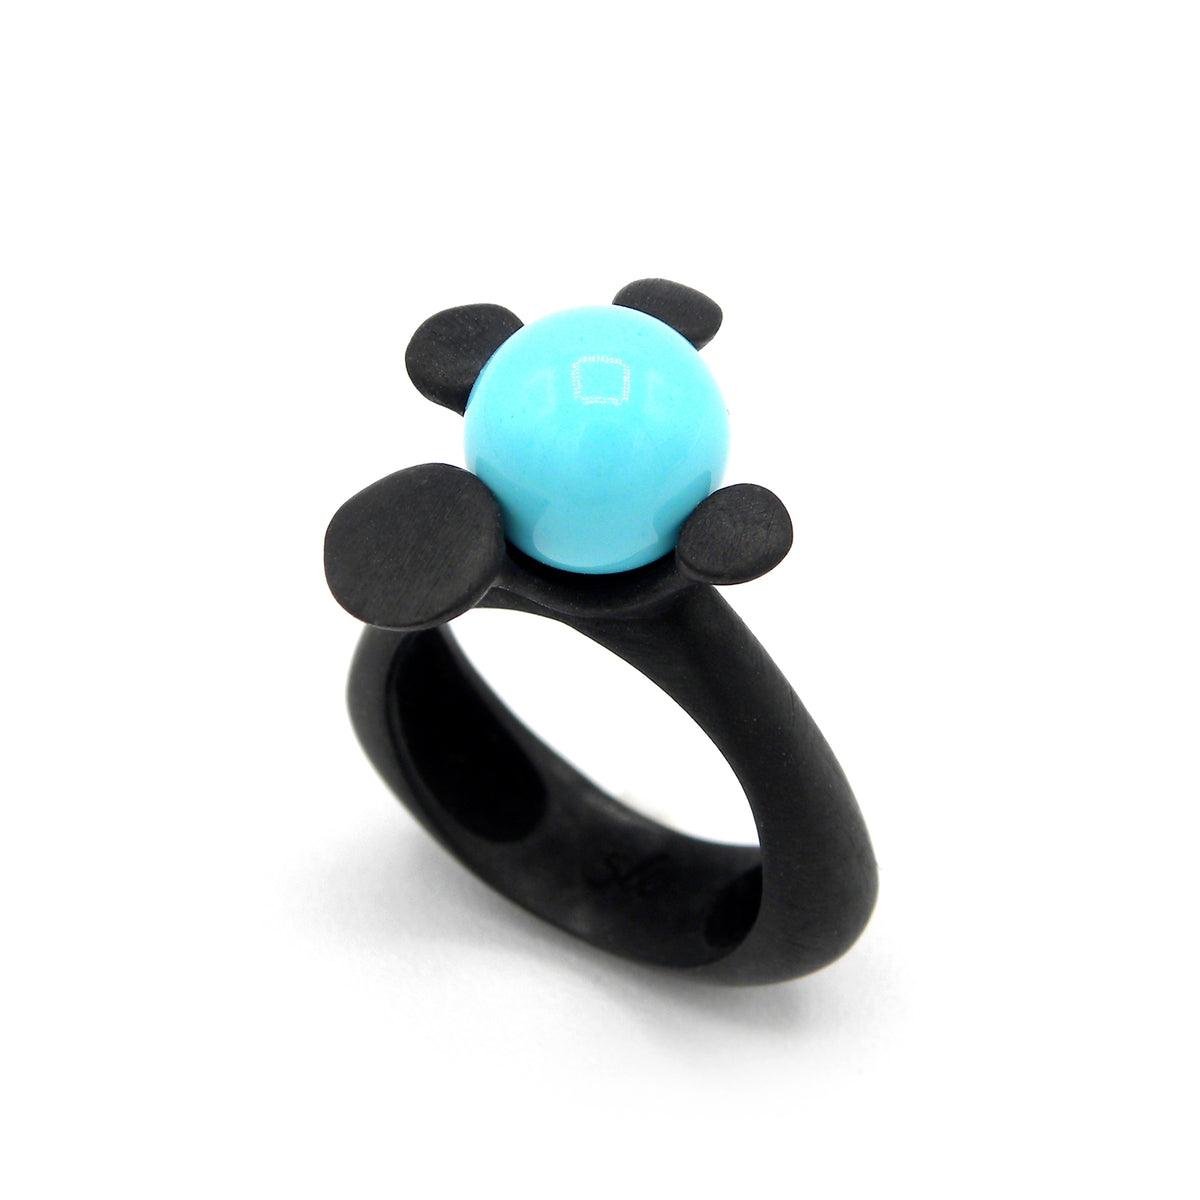 Turquoise Snorky ring